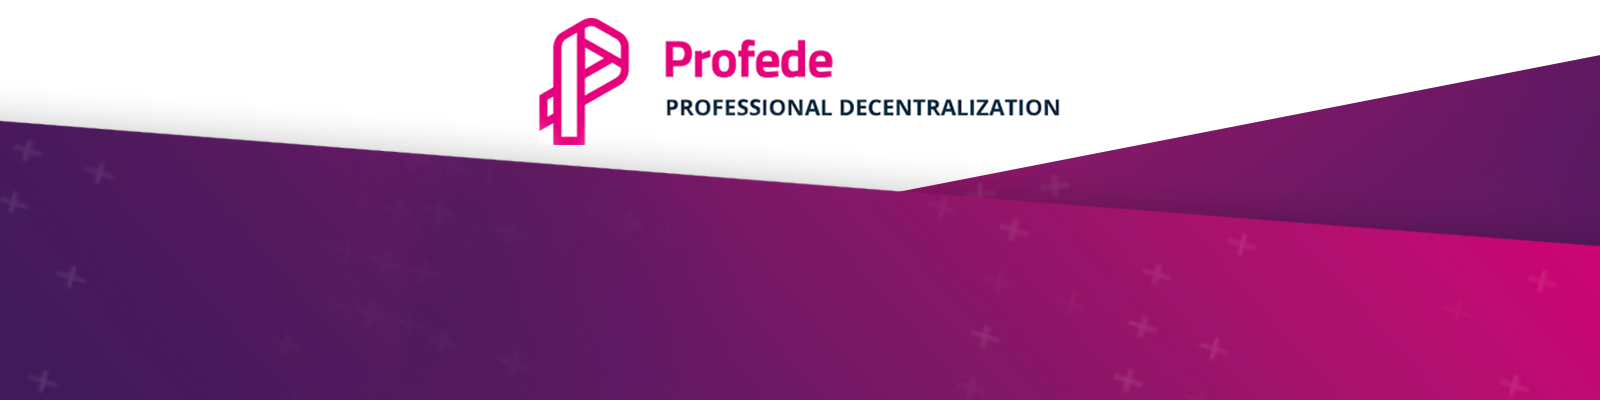 Profede.png